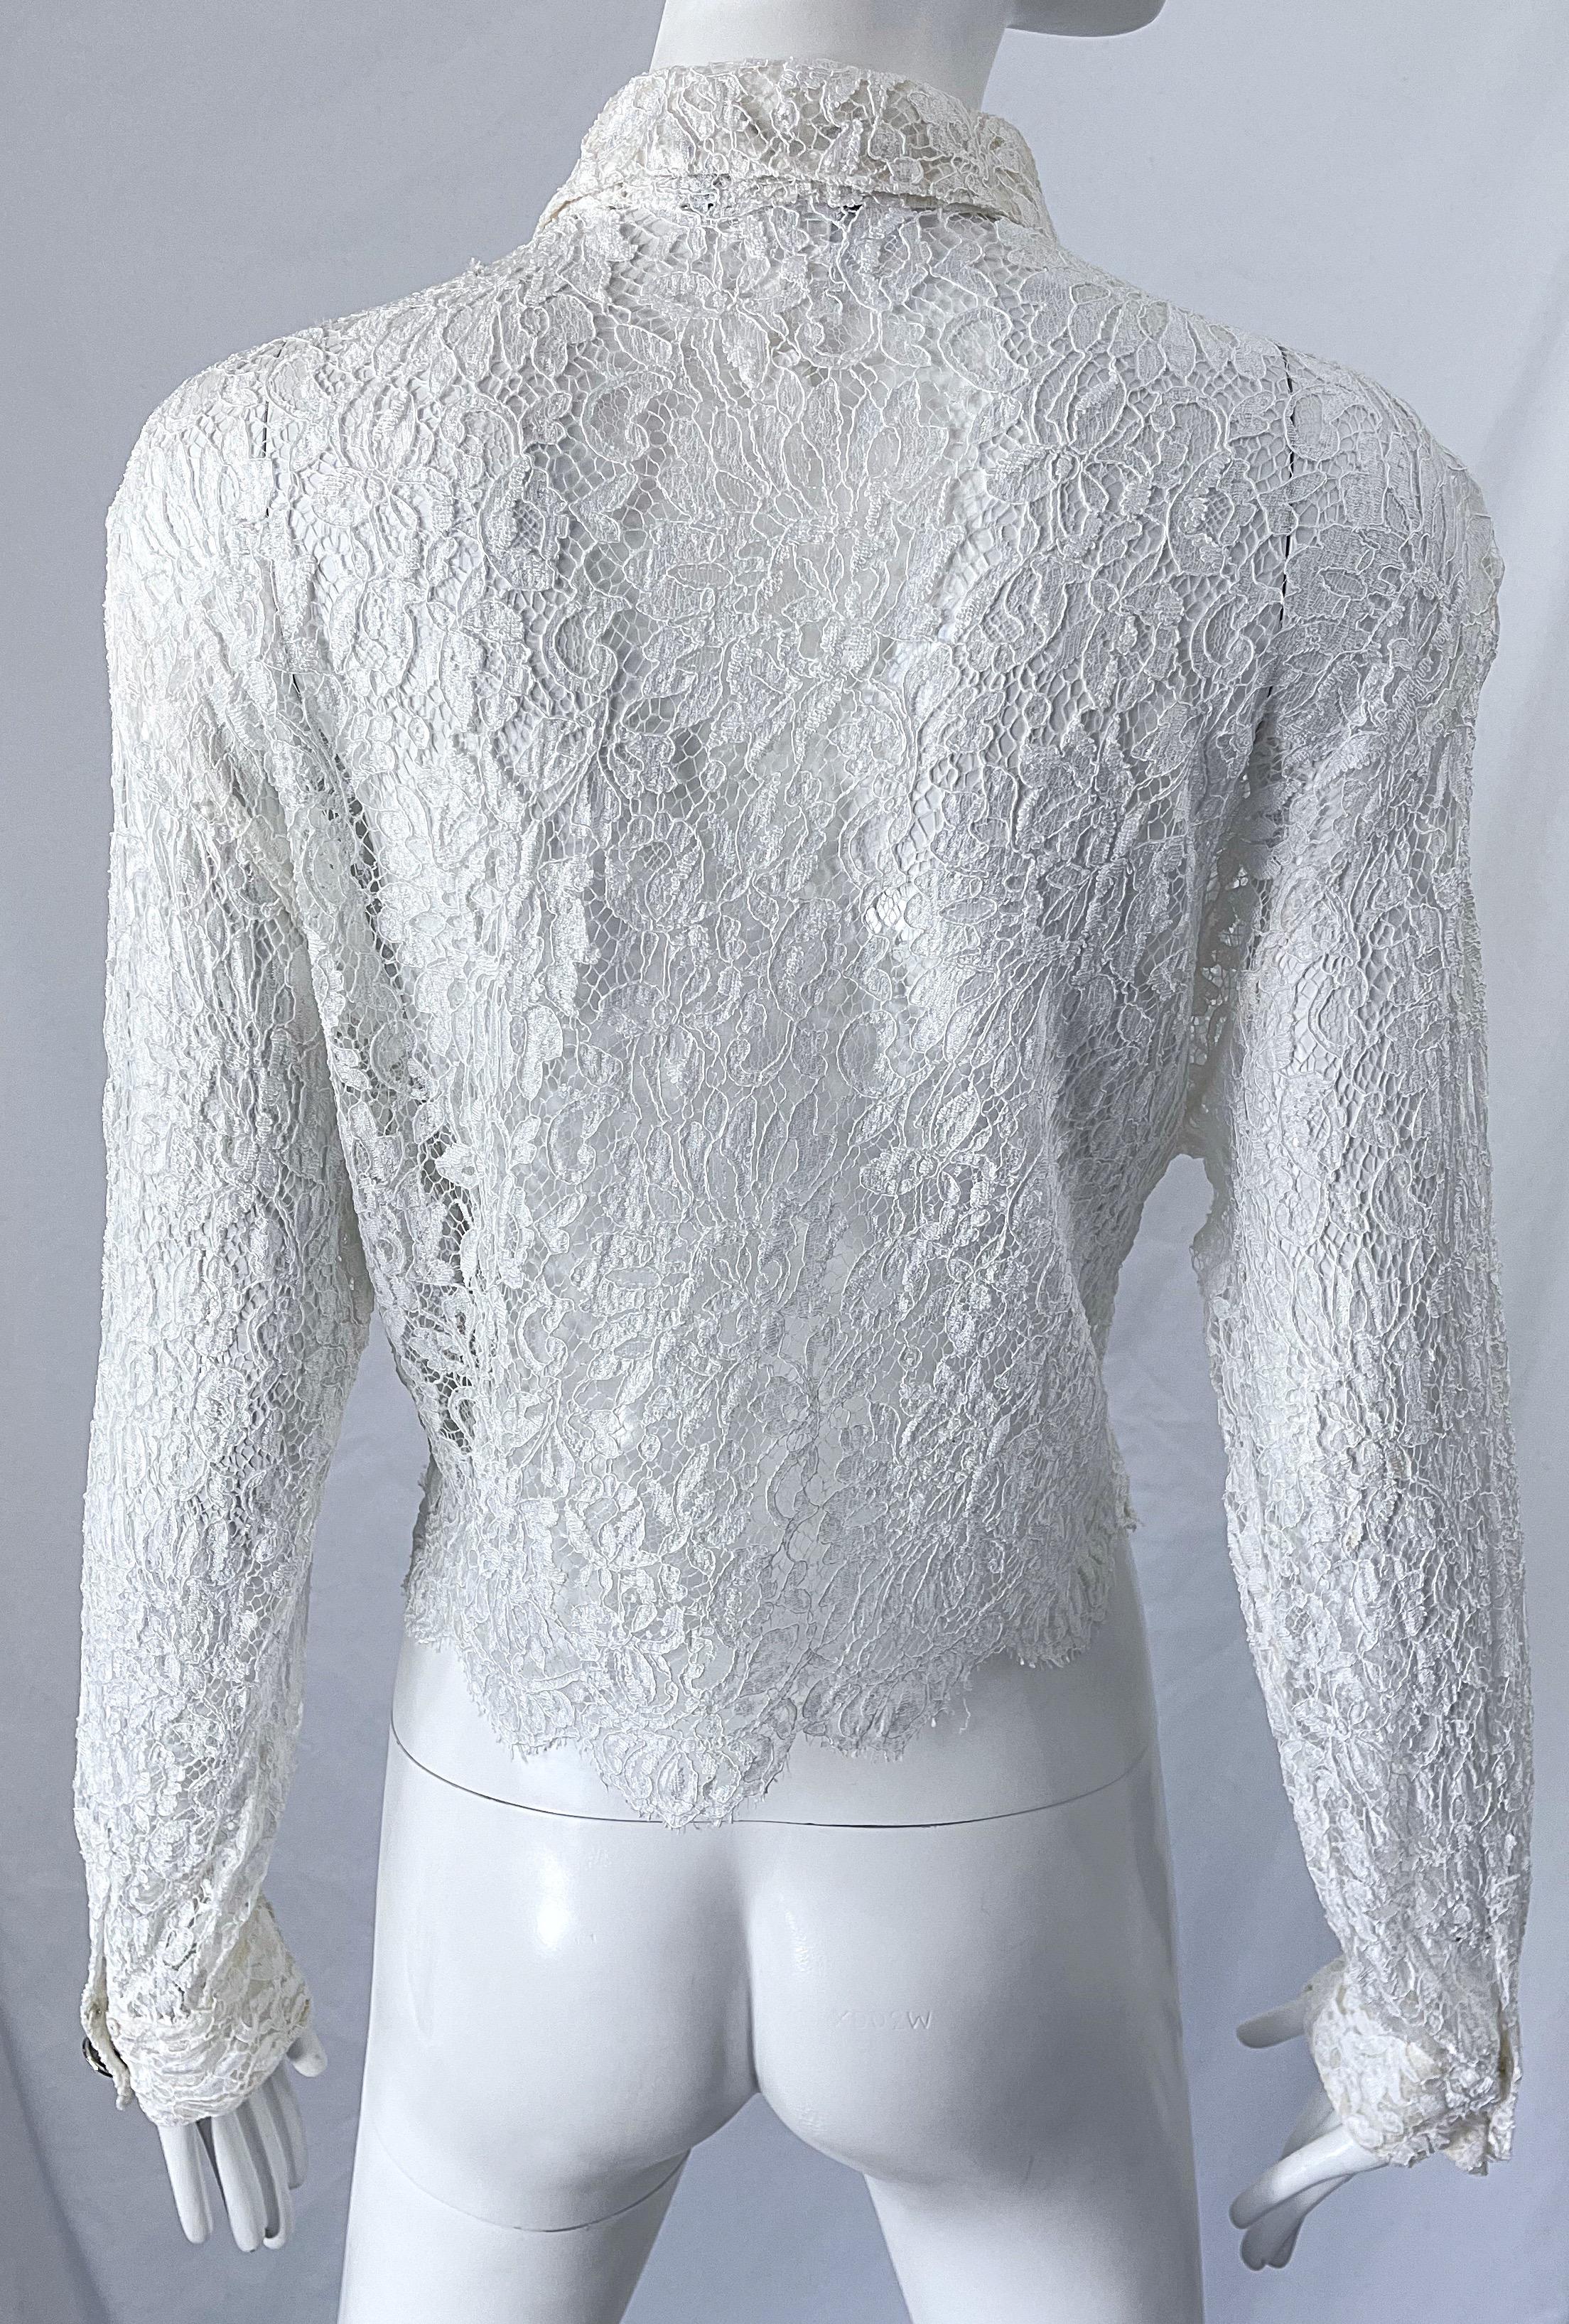 1990s Gianni Versace Couture White Lace Medusa Buttons Size 44 8 / 10 Blouse Top 1